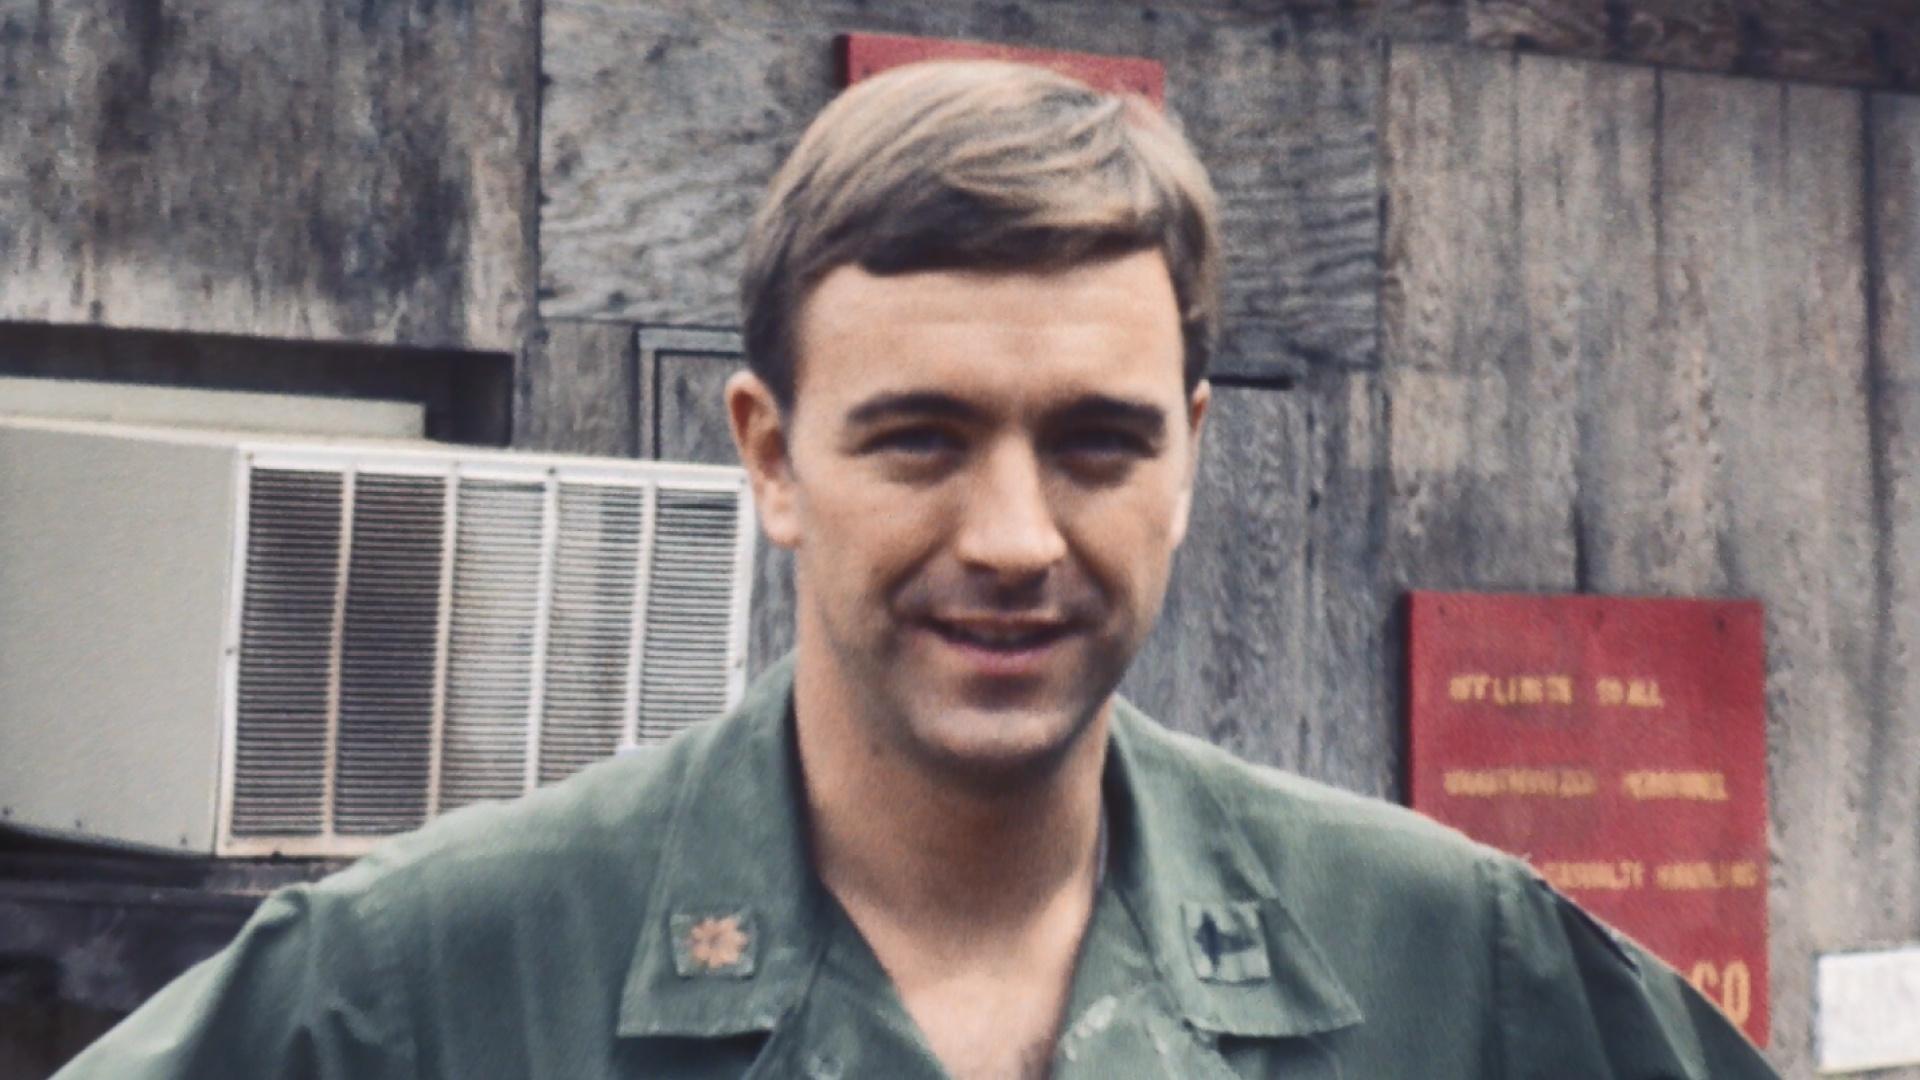 Image shows American soldier in Vietnam posing for a photo.